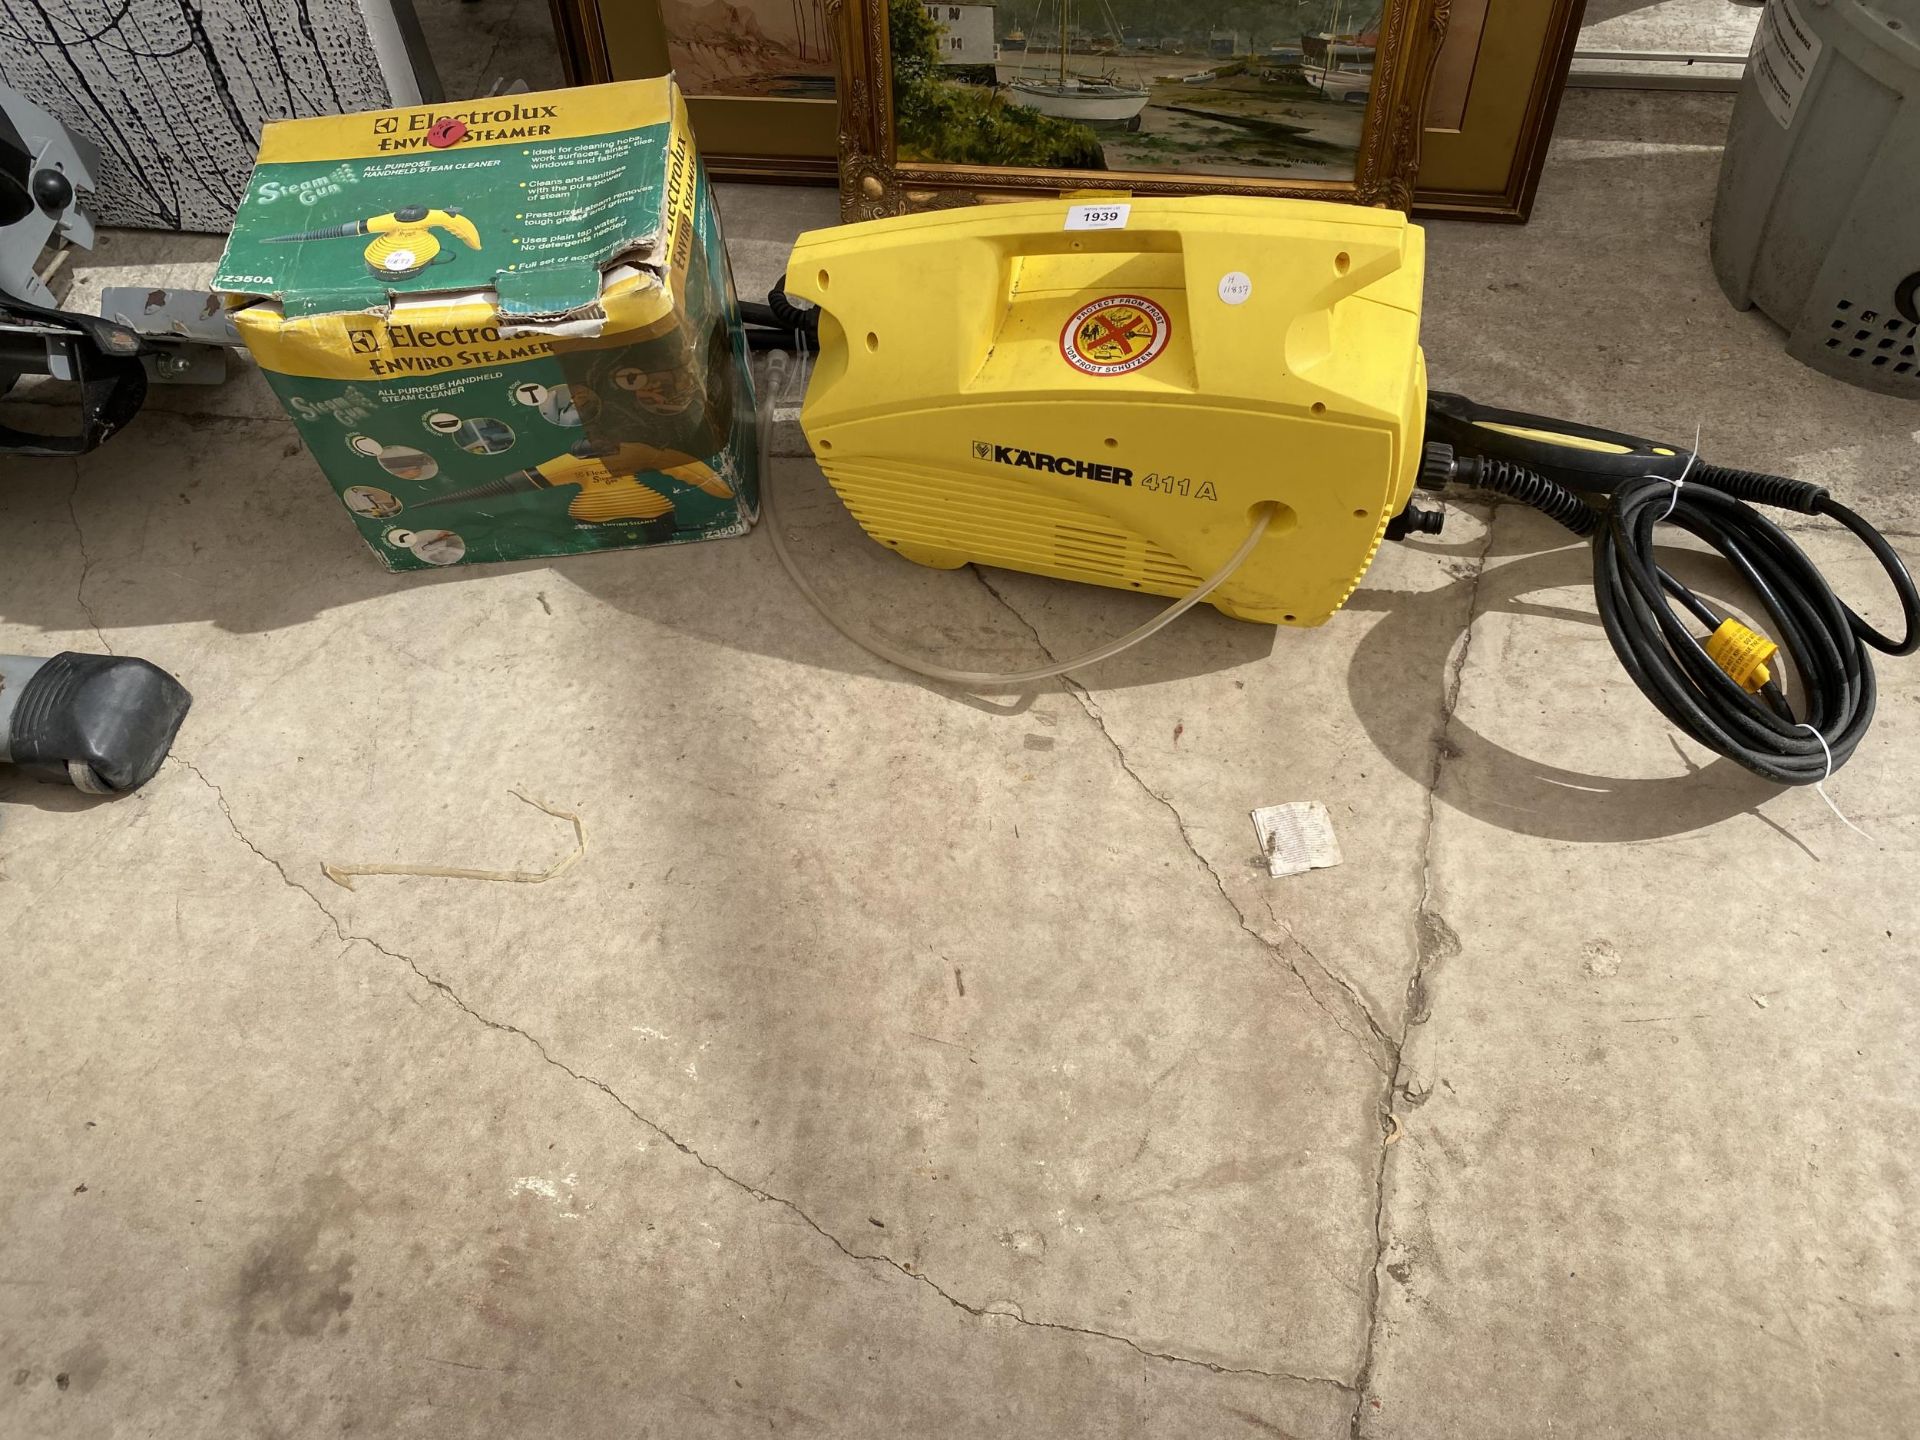 A KARCHER 411A ELECTRIC PRESSURE WASHER AND AN ELECTROLUX STEAMER